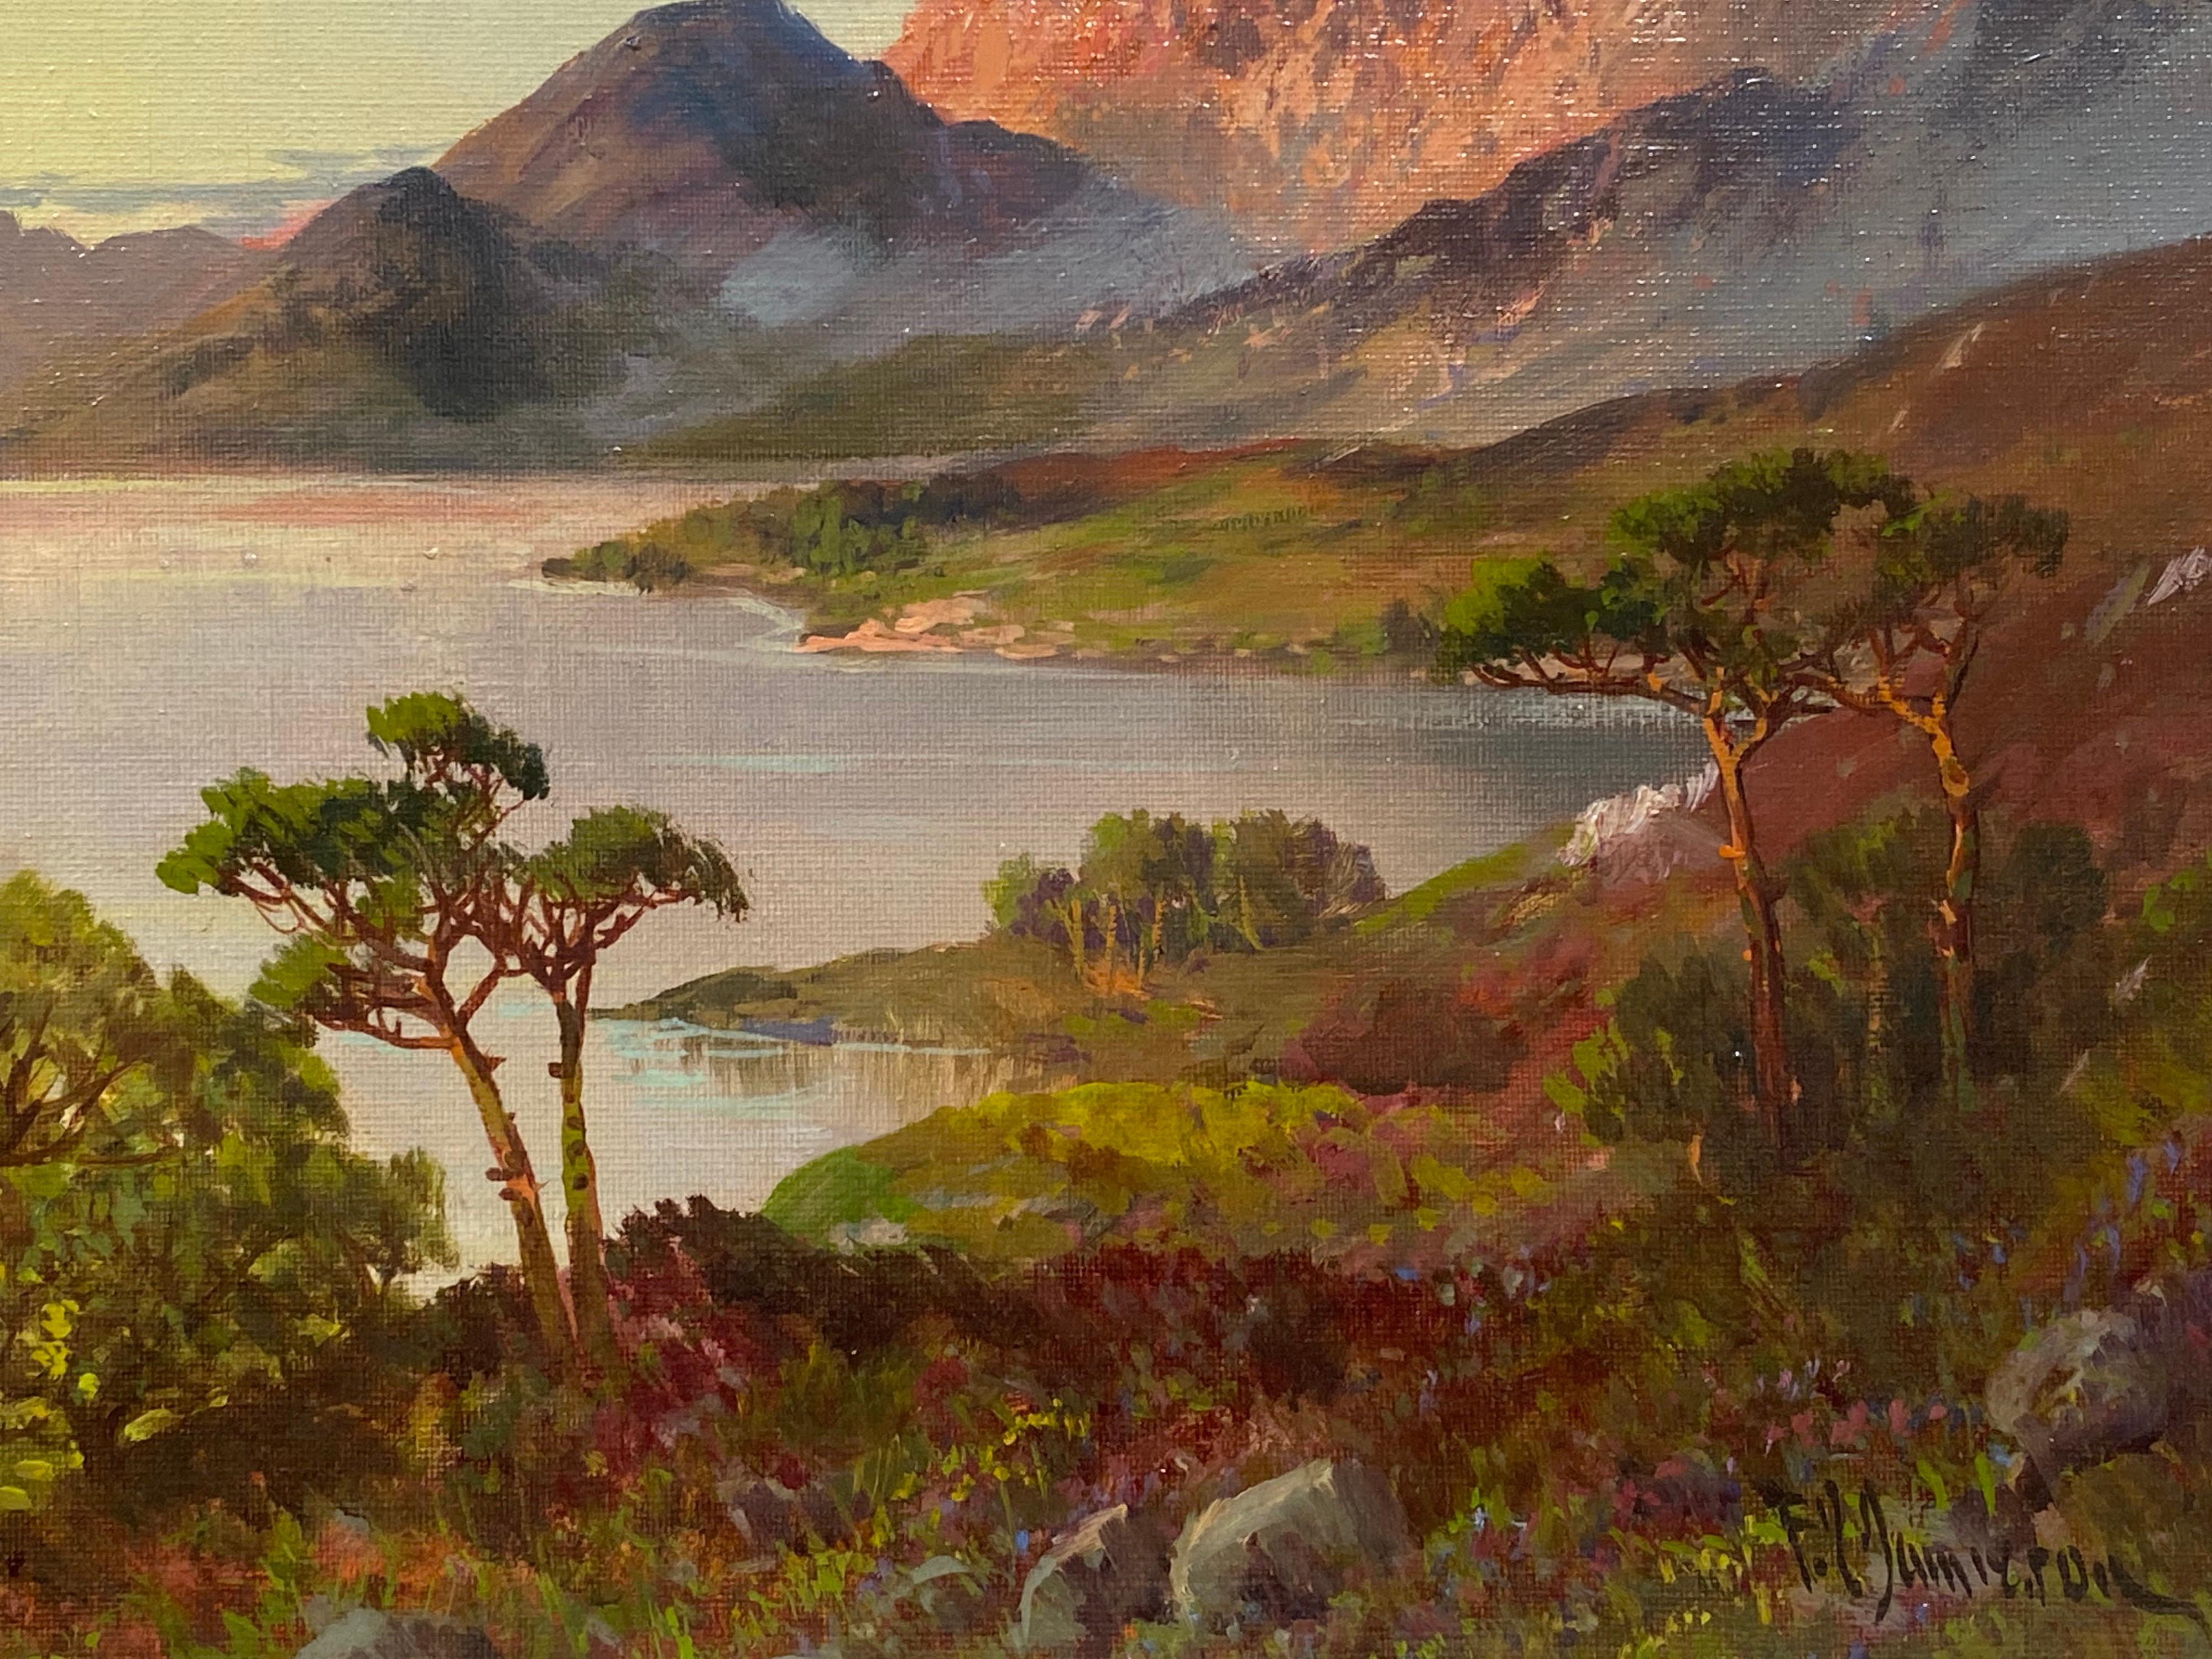 Antique Scottish Highlands Oil Painting Sunset over the Mountain Loch Waters - Brown Figurative Painting by Francis E. Jamieson